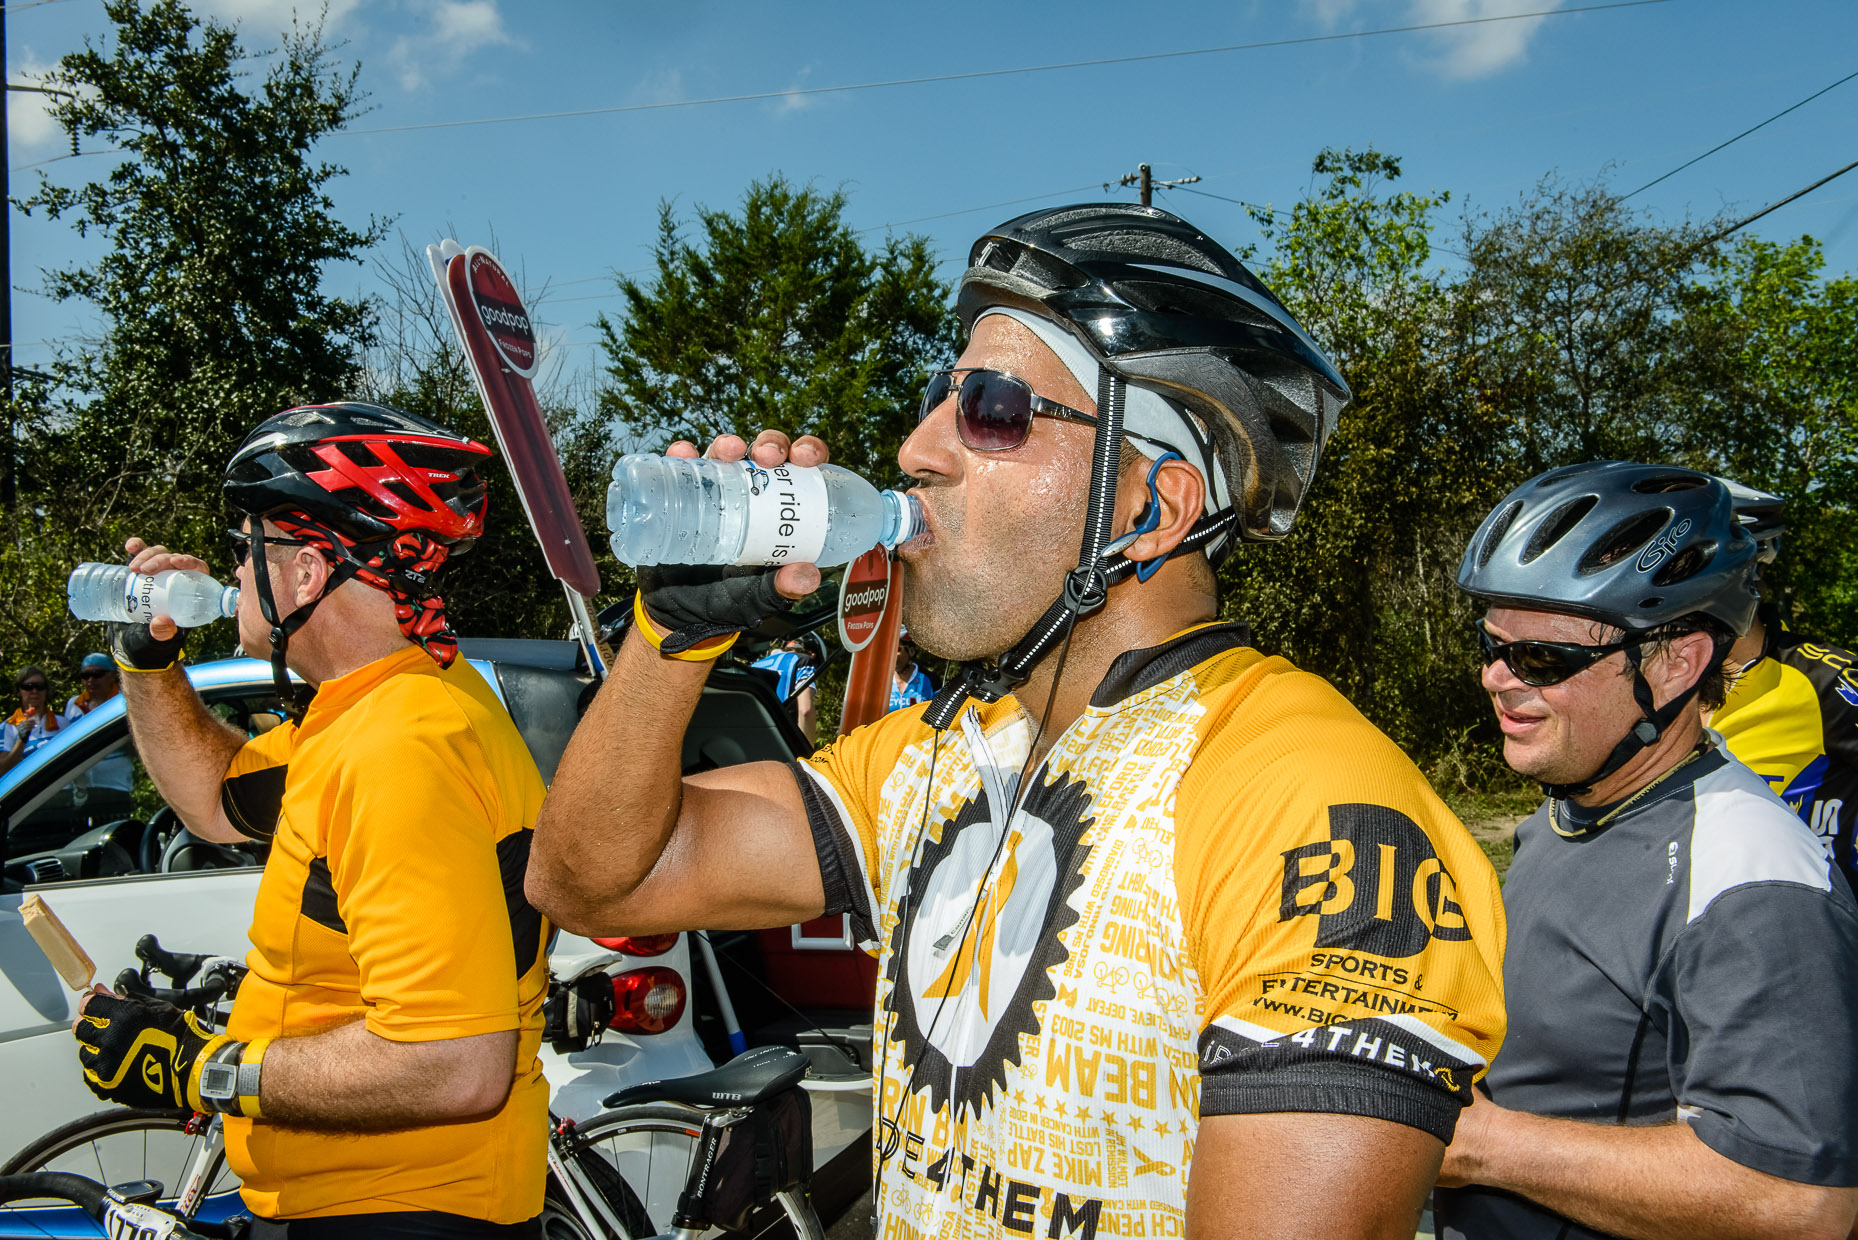 Livestrong-Challenge-15th-anniversary-ride-car2go-bicyclist.jpg